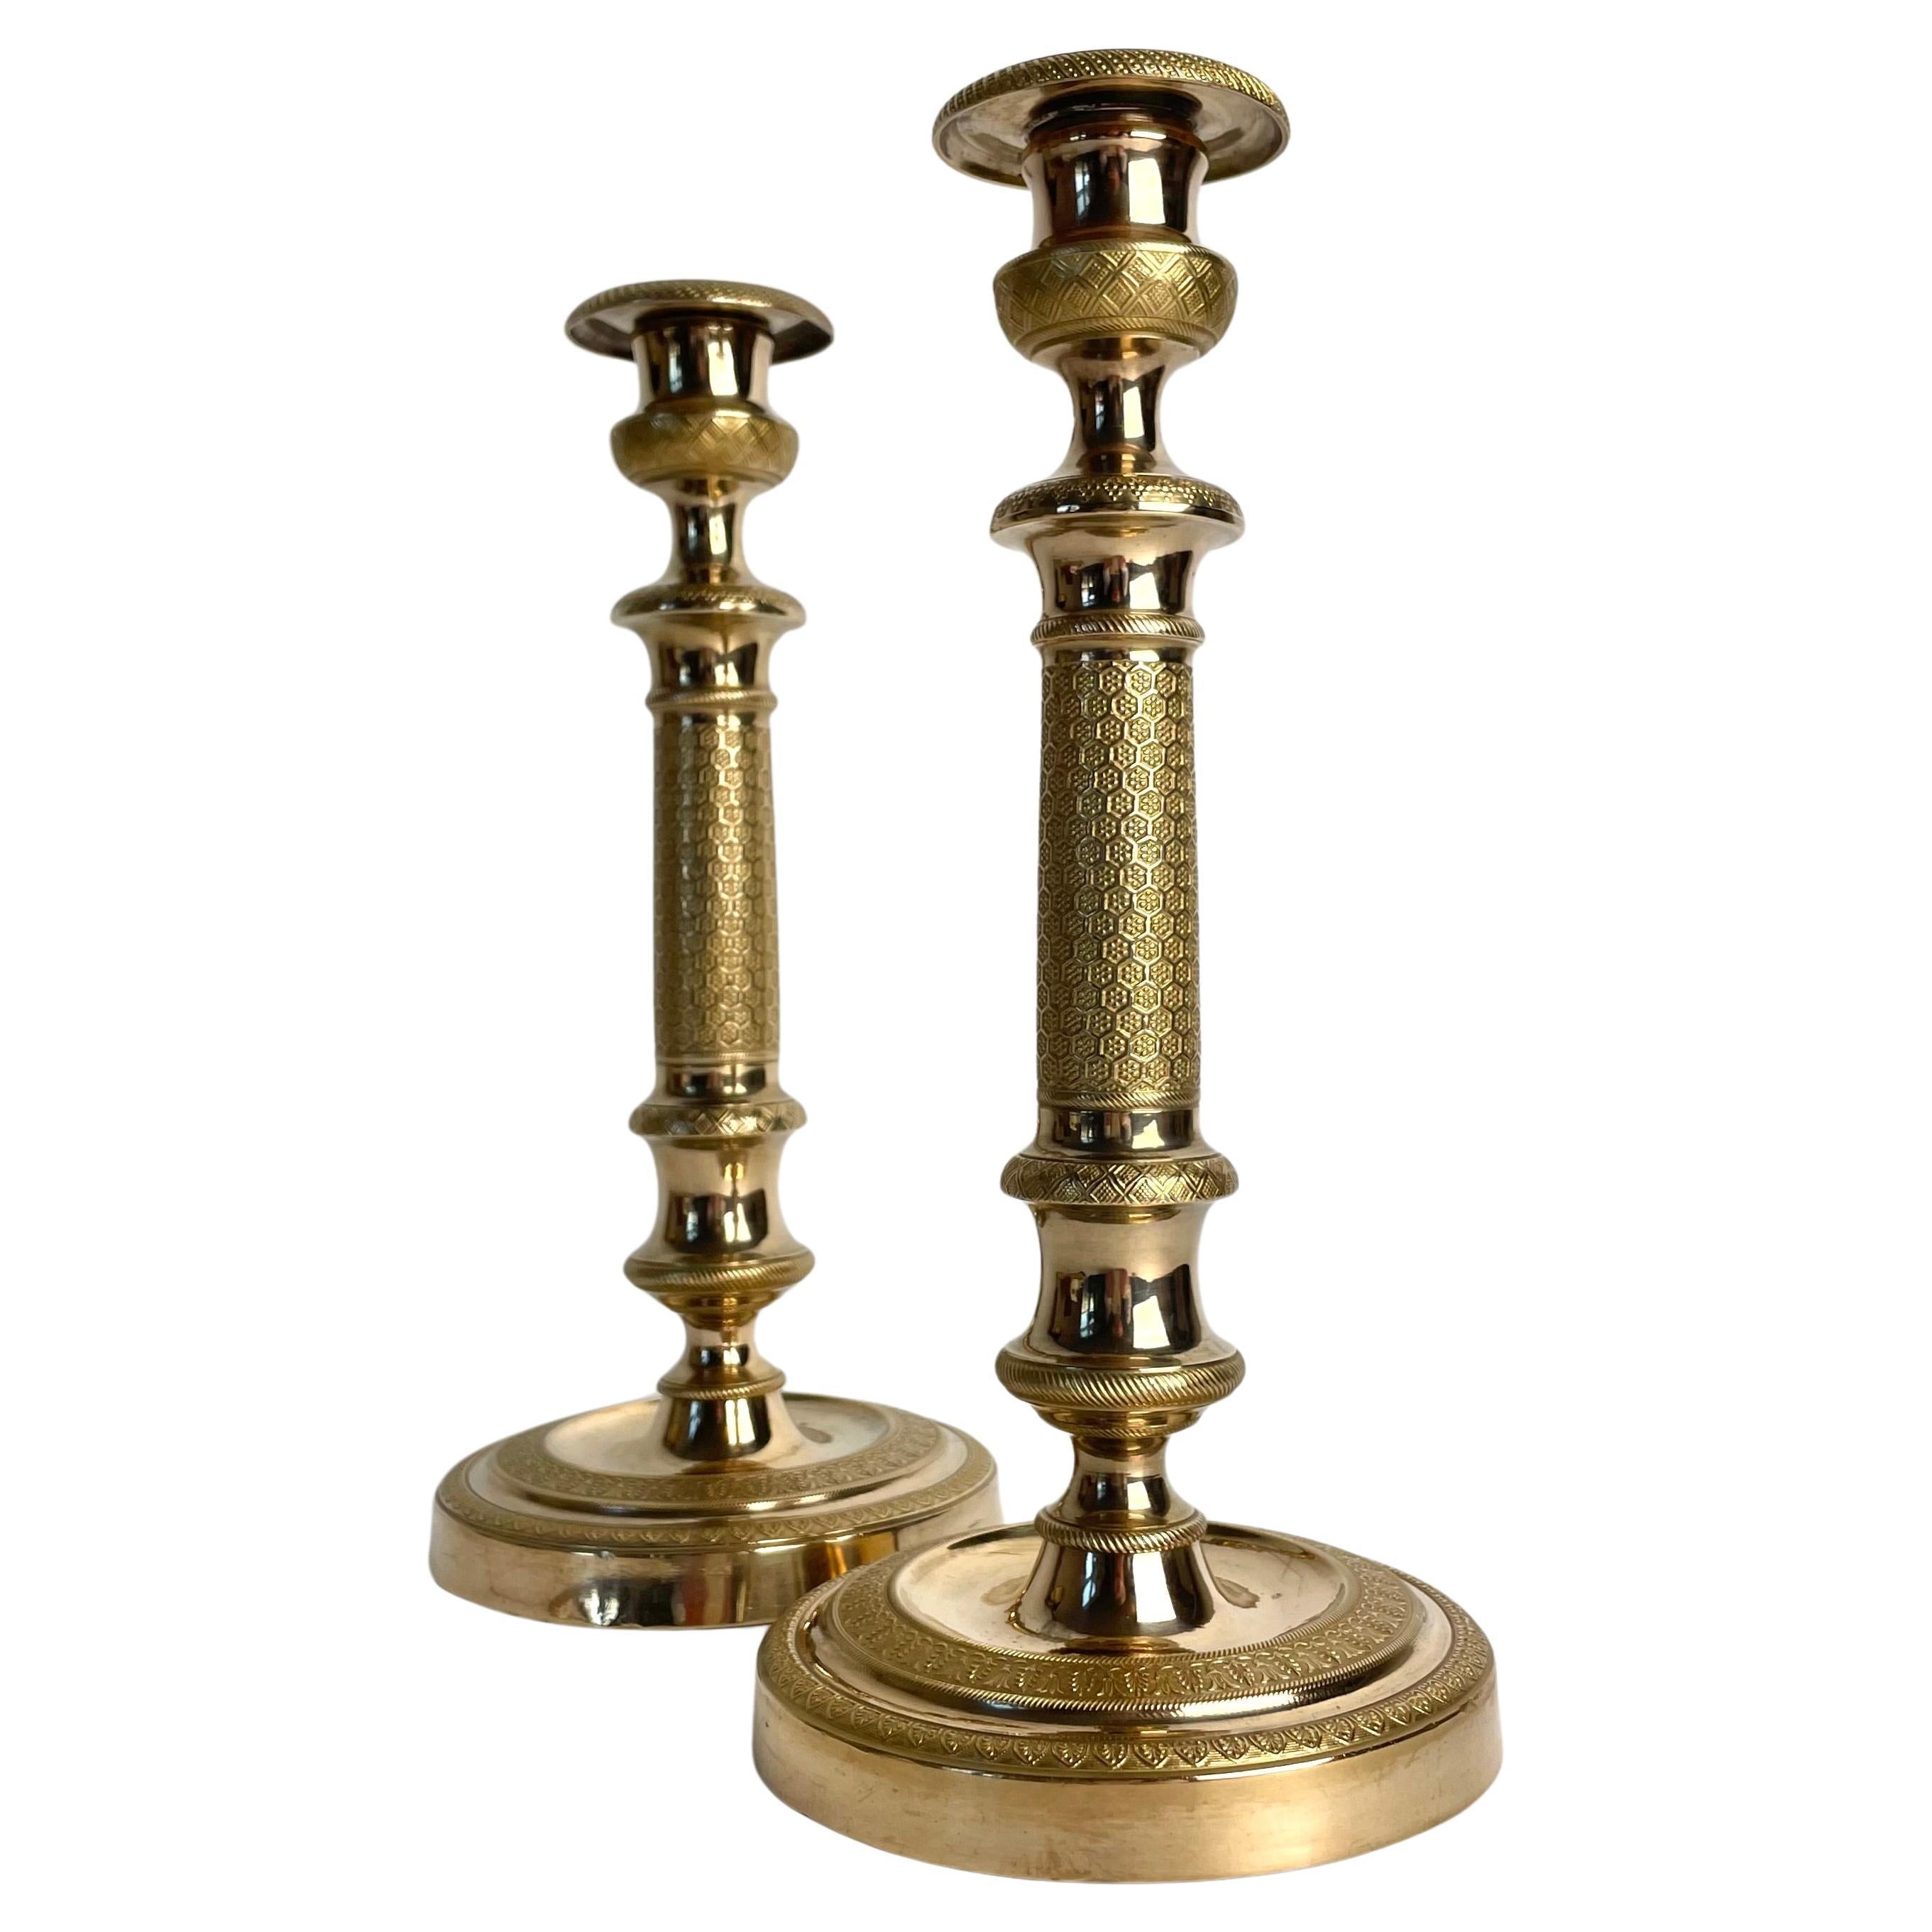 Elegant pair of Empire Candlesticks in gilt bronze from the 1820s. 